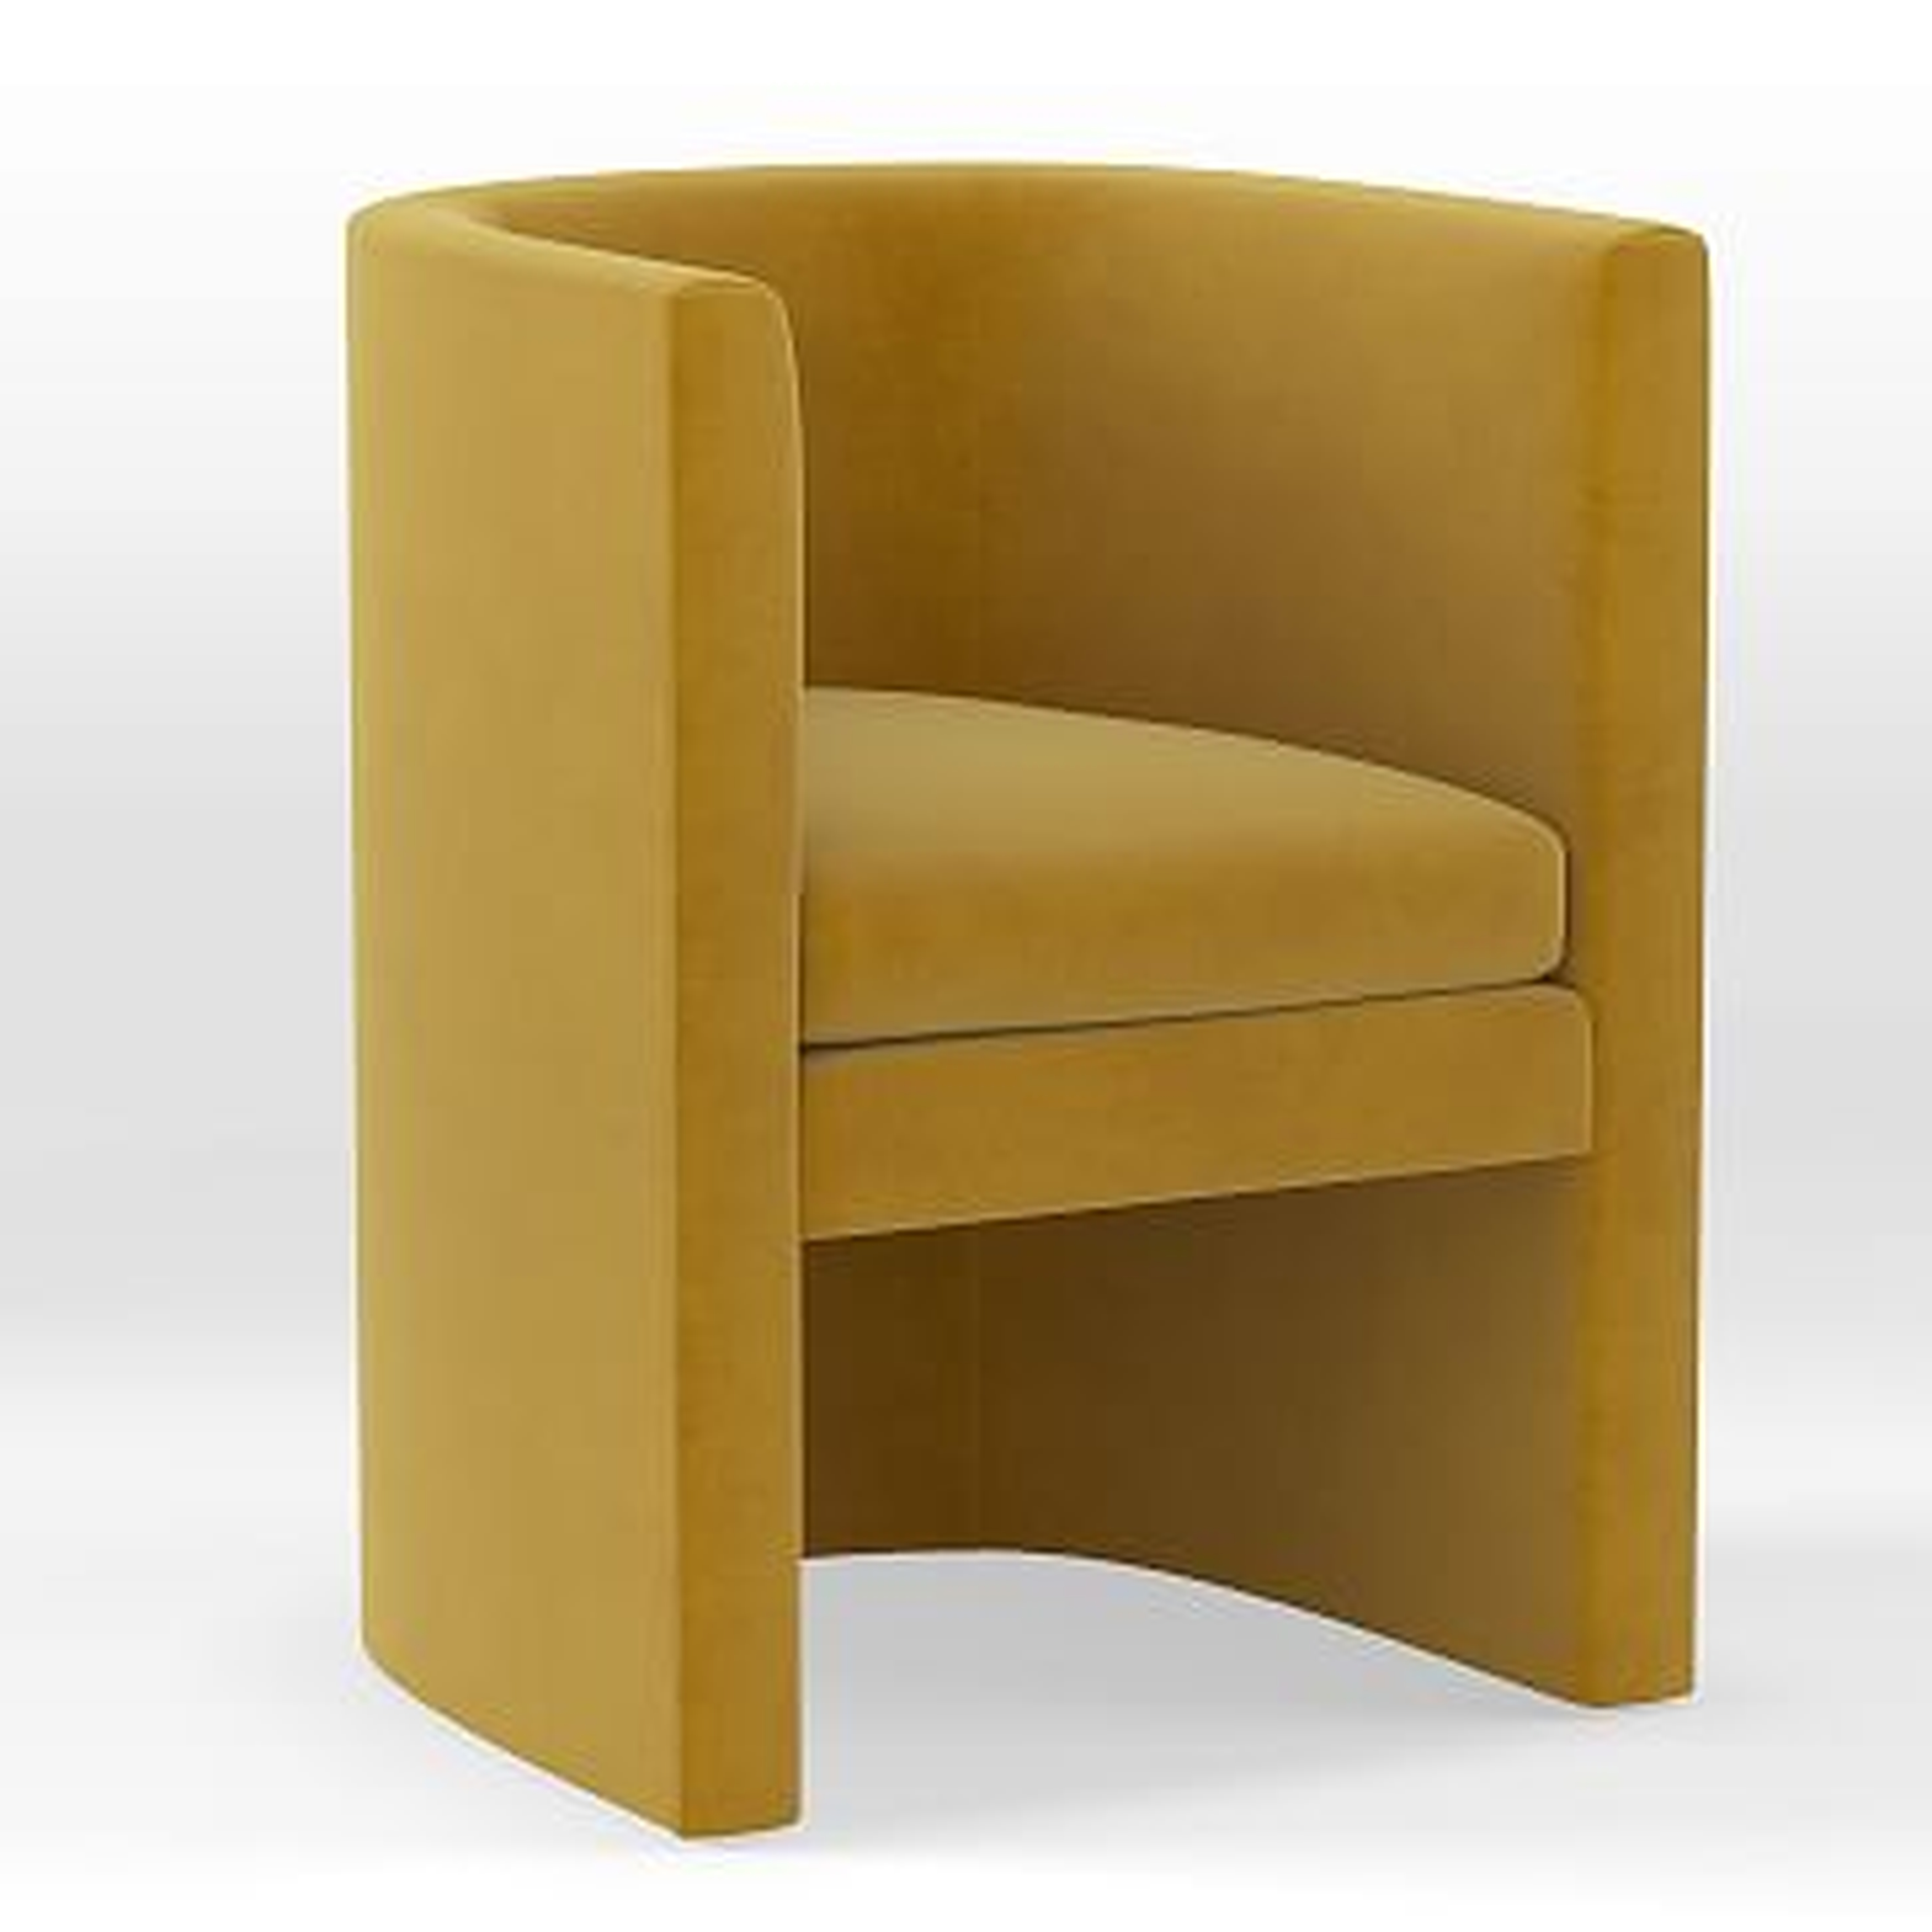 Rounded Modern Dining Chair, Monaco Citronella - West Elm